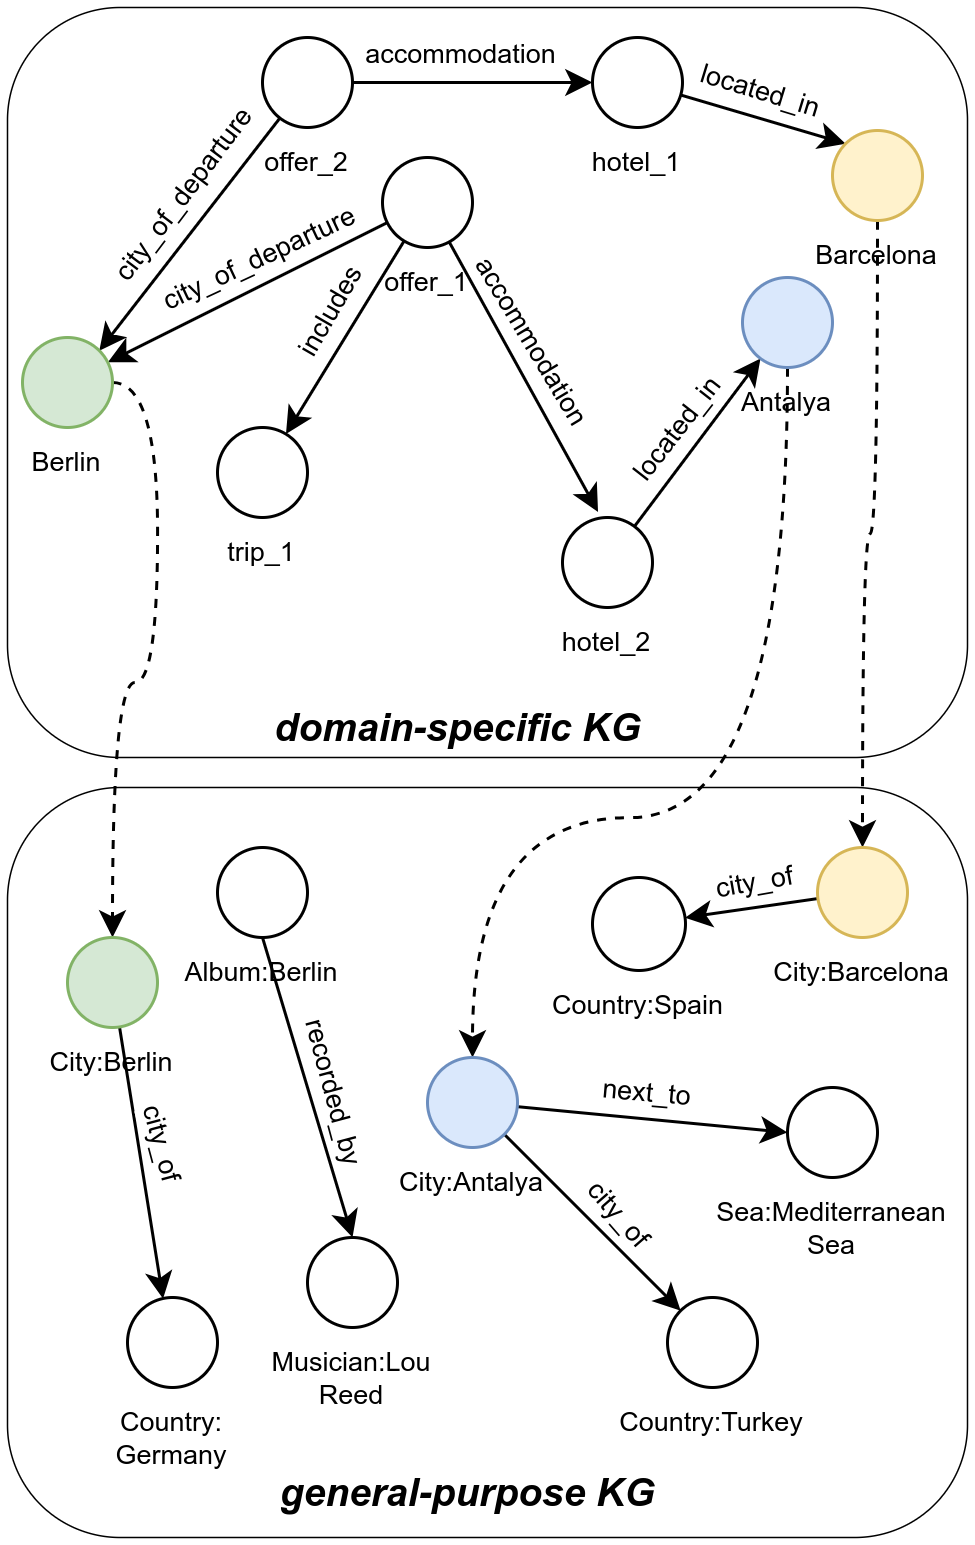 Empowering Small-Scale Knowledge Graphs: A Strategy of Leveraging General-Purpose Knowledge Graphs for Enriched Embeddings